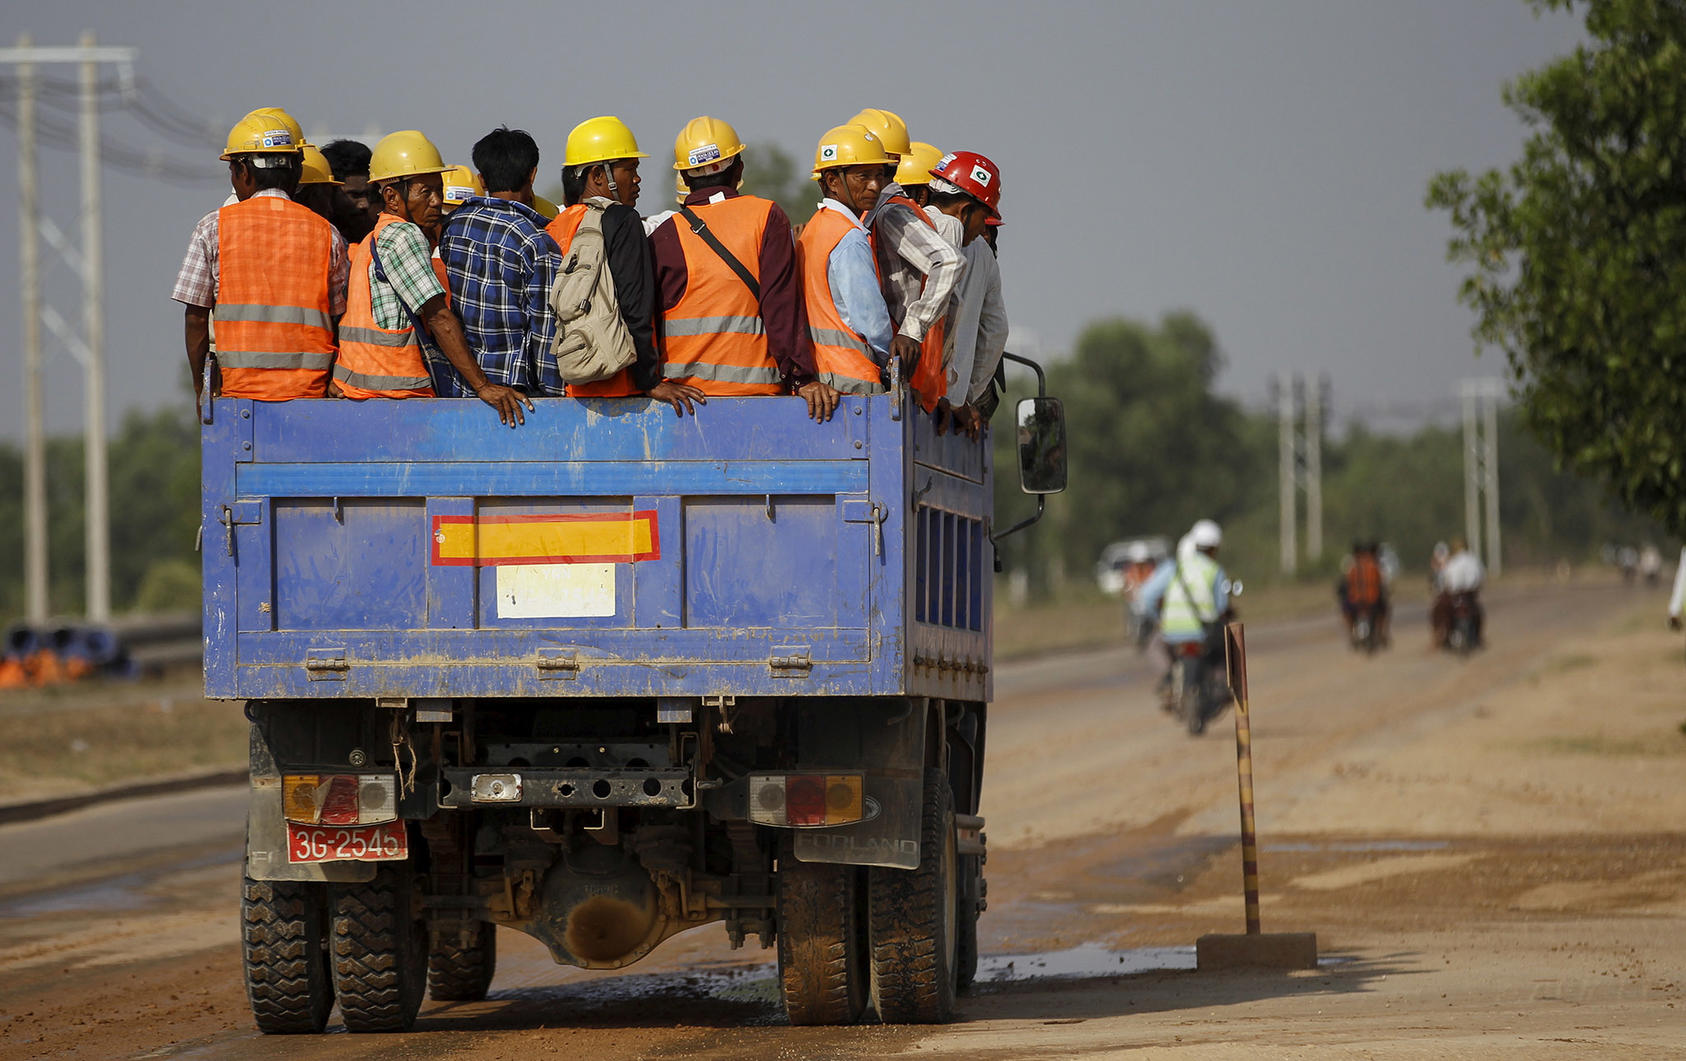 Construction workers ride to the site of the Thilawa Special Economic Zone, approximately fifteen miles south of Yangon, on May 8, 2015. (Soe Zeya Tun/Reuters)